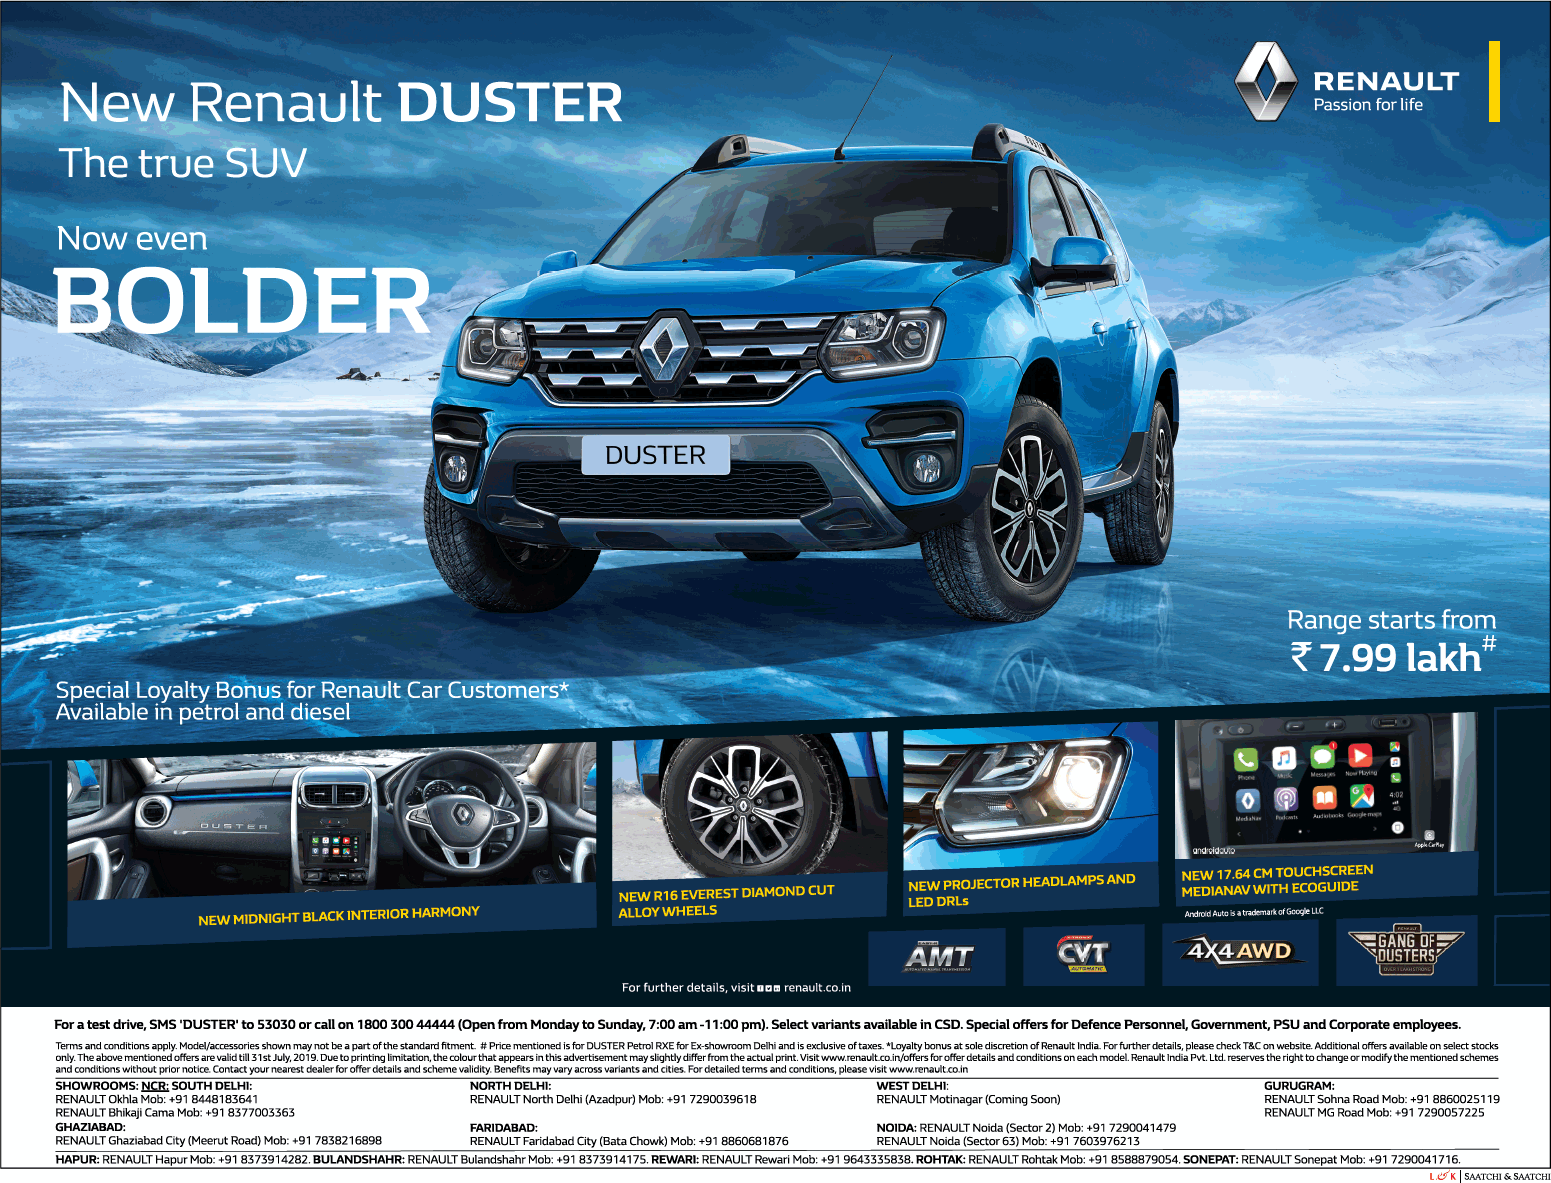 renault-duster-now-even-bolder-rs-7.99-lakh-ad-delhi-times-16-07-2019.png